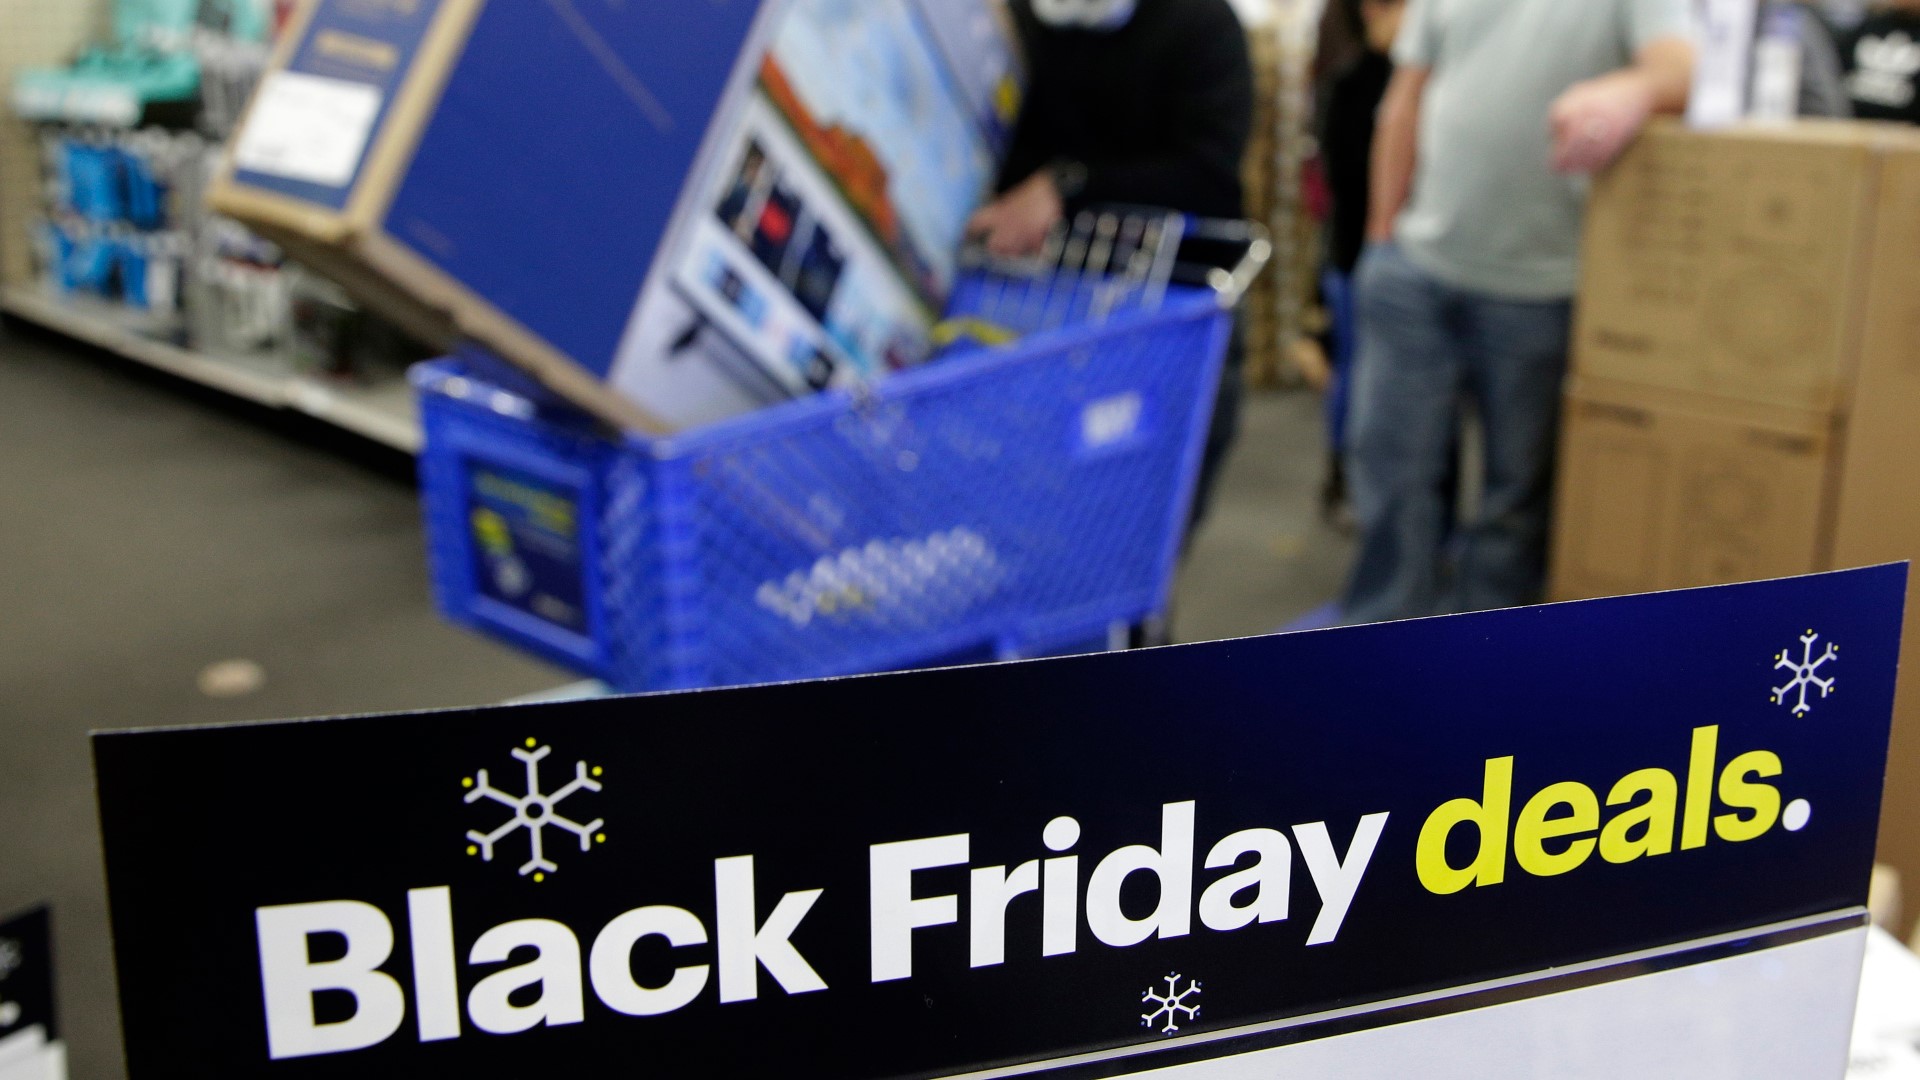 Stores brace for Black Friday changes | Business Headlines